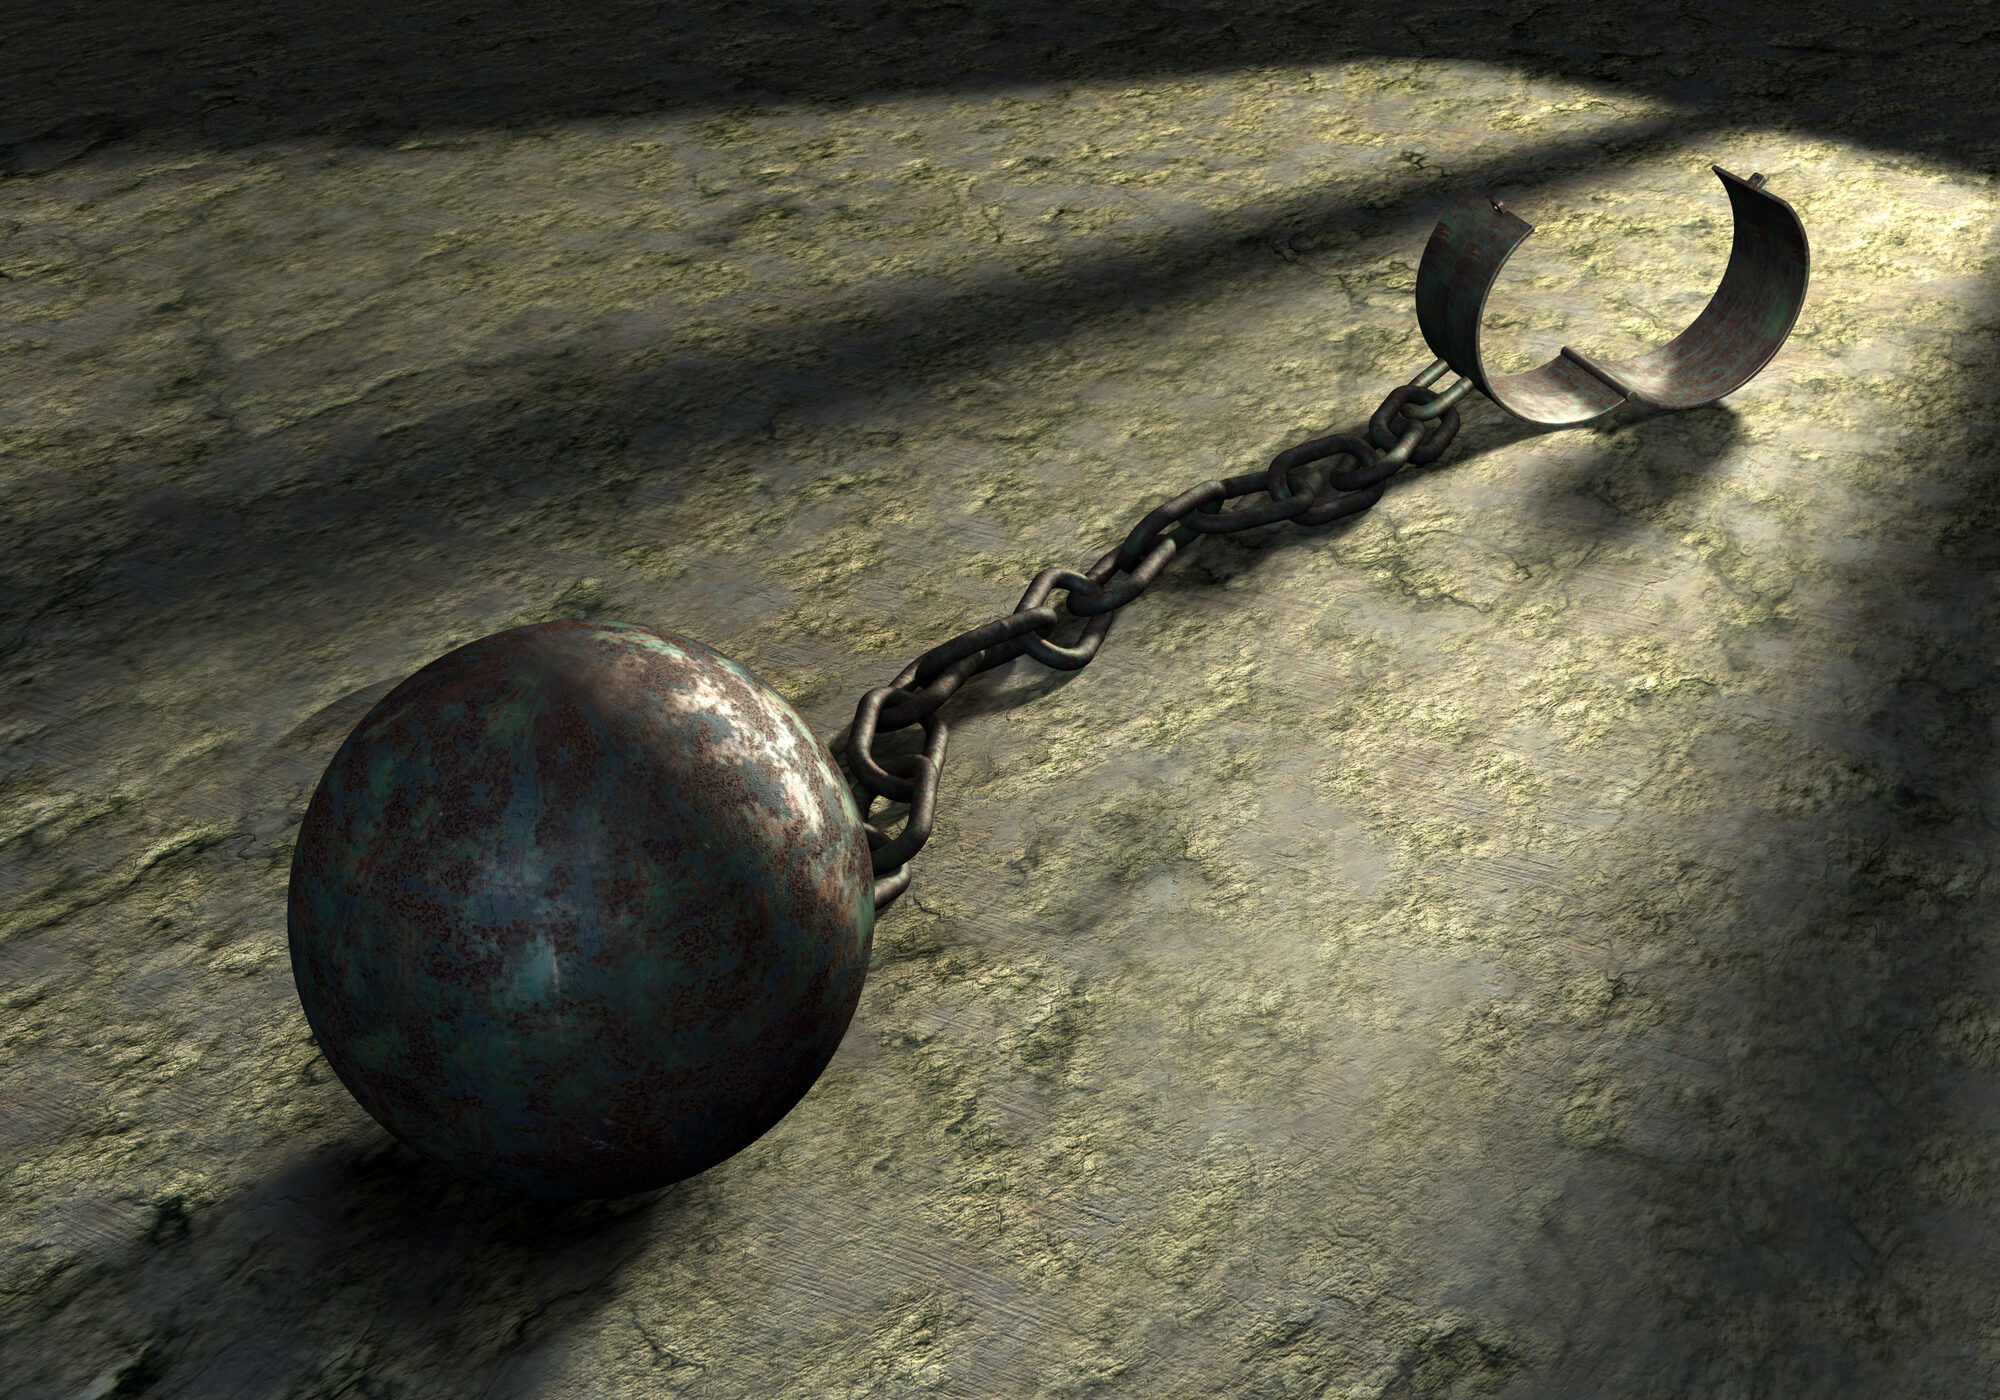 Steel ball and chain in a prison cell. Digital illustration.